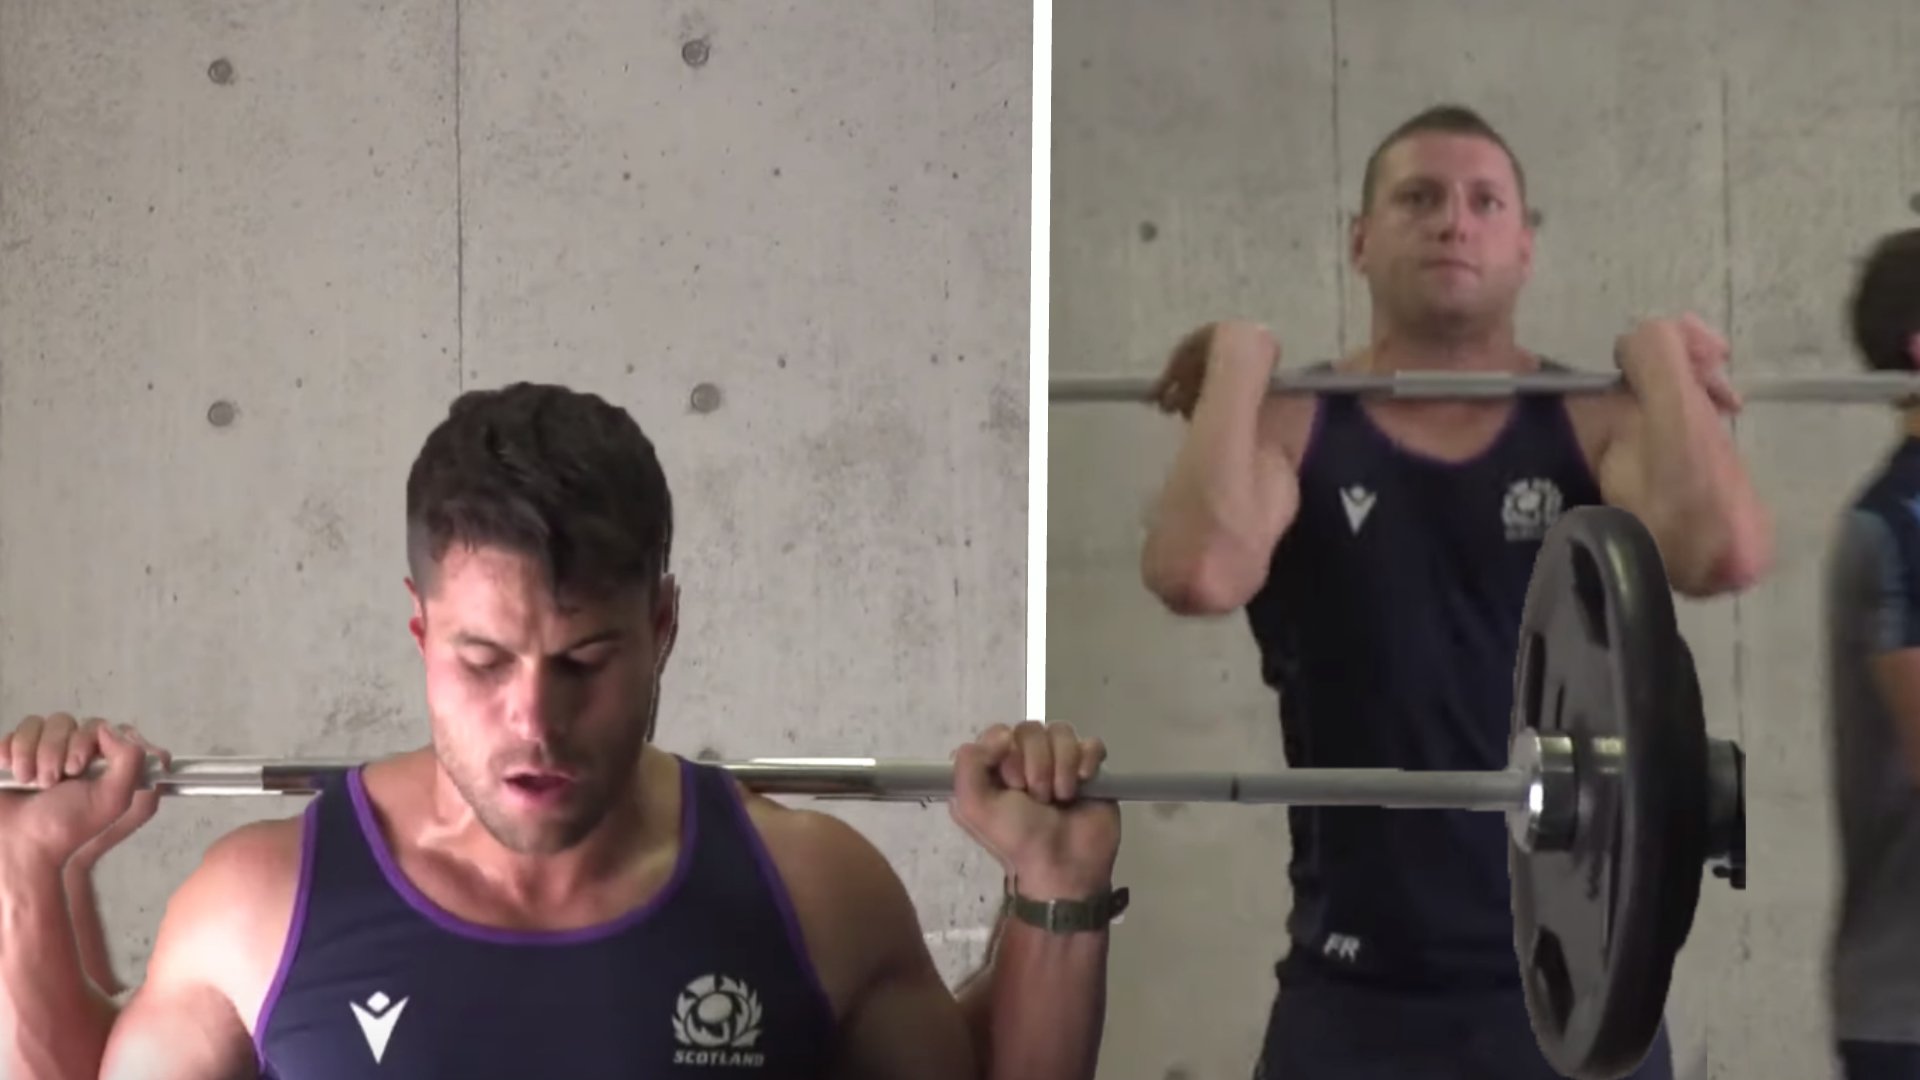 Scotland look suitably JACKED as they train for World Cup